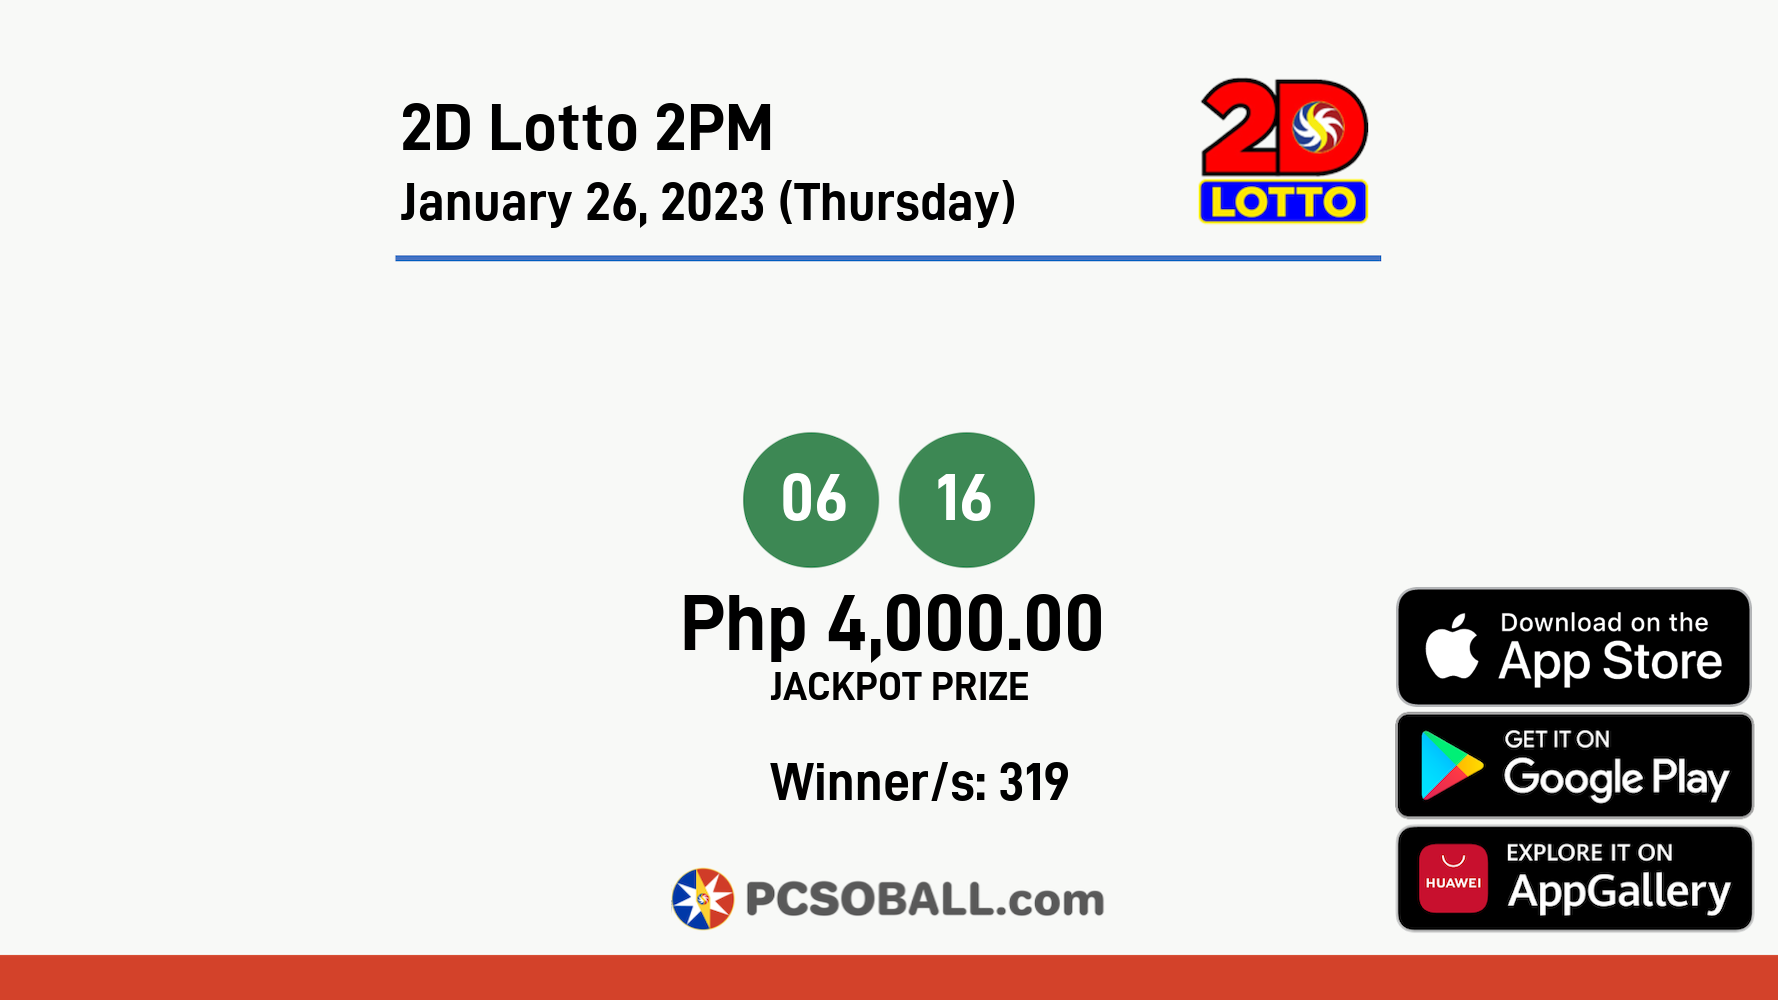 2D Lotto 2PM January 26, 2023 (Thursday) Result